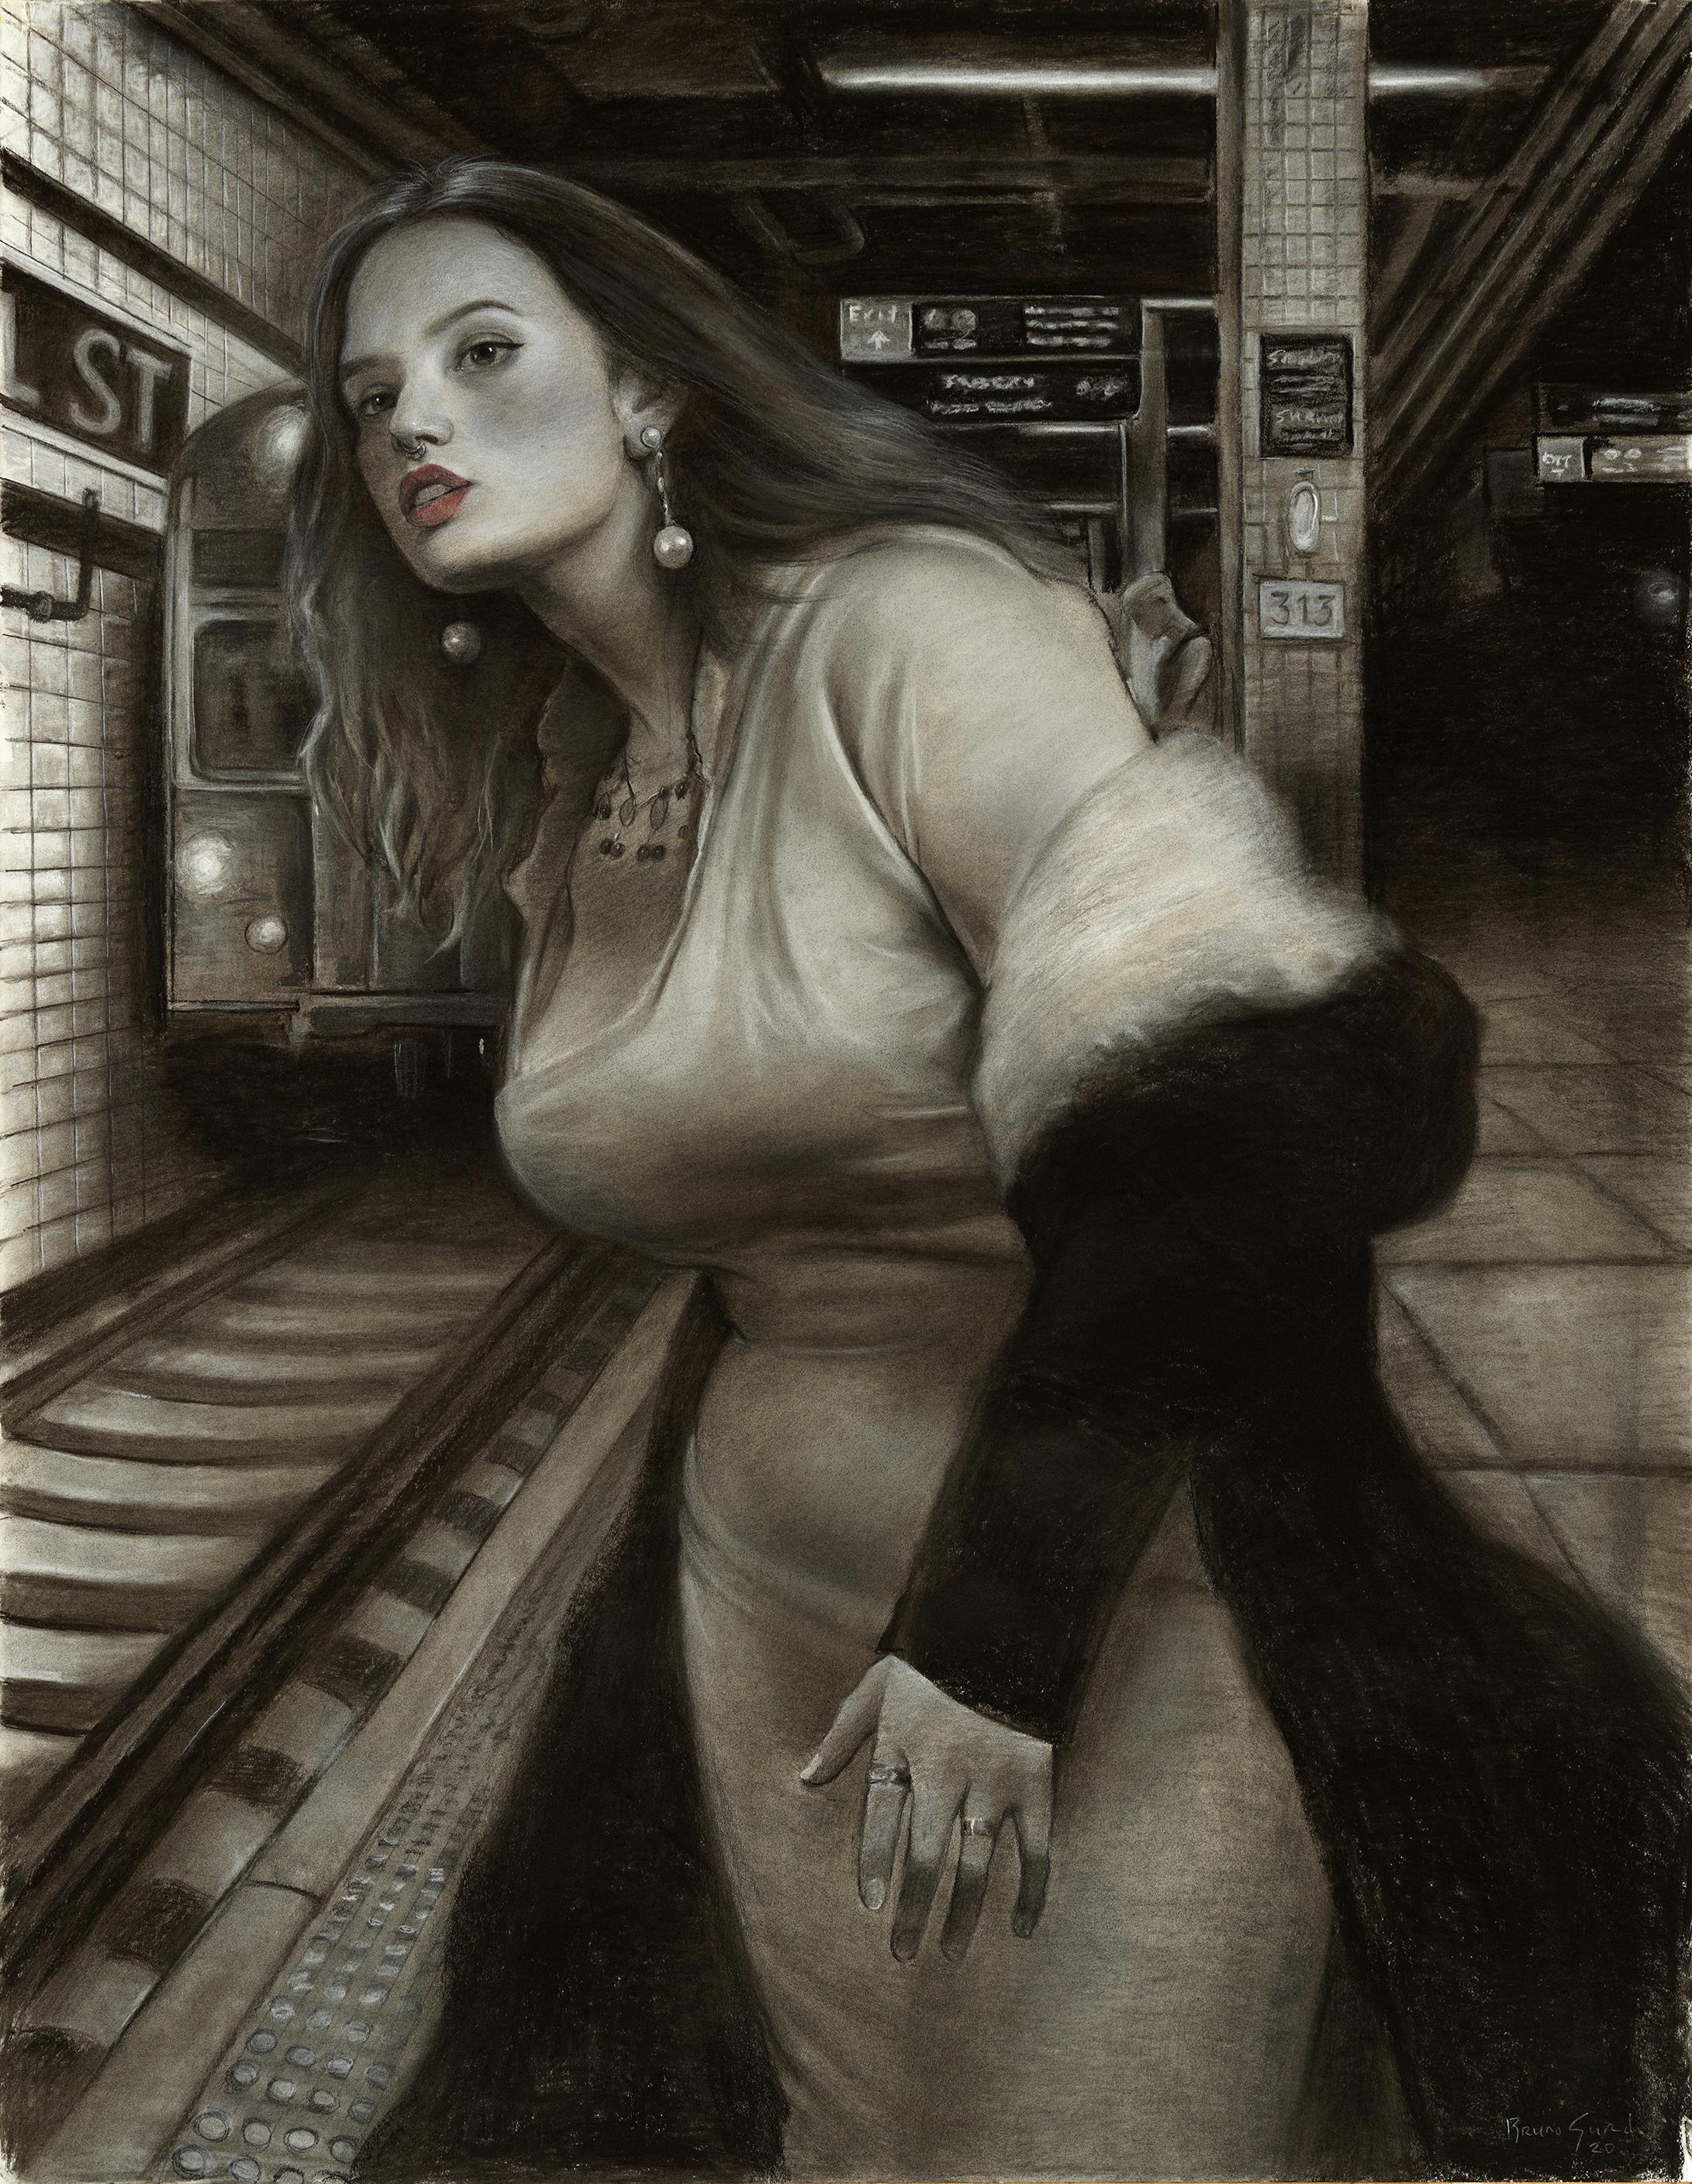 Bruno Surdo Figurative Art - Waiting for the Express, Female Figure in the New York Subway, Charcoal on Paper